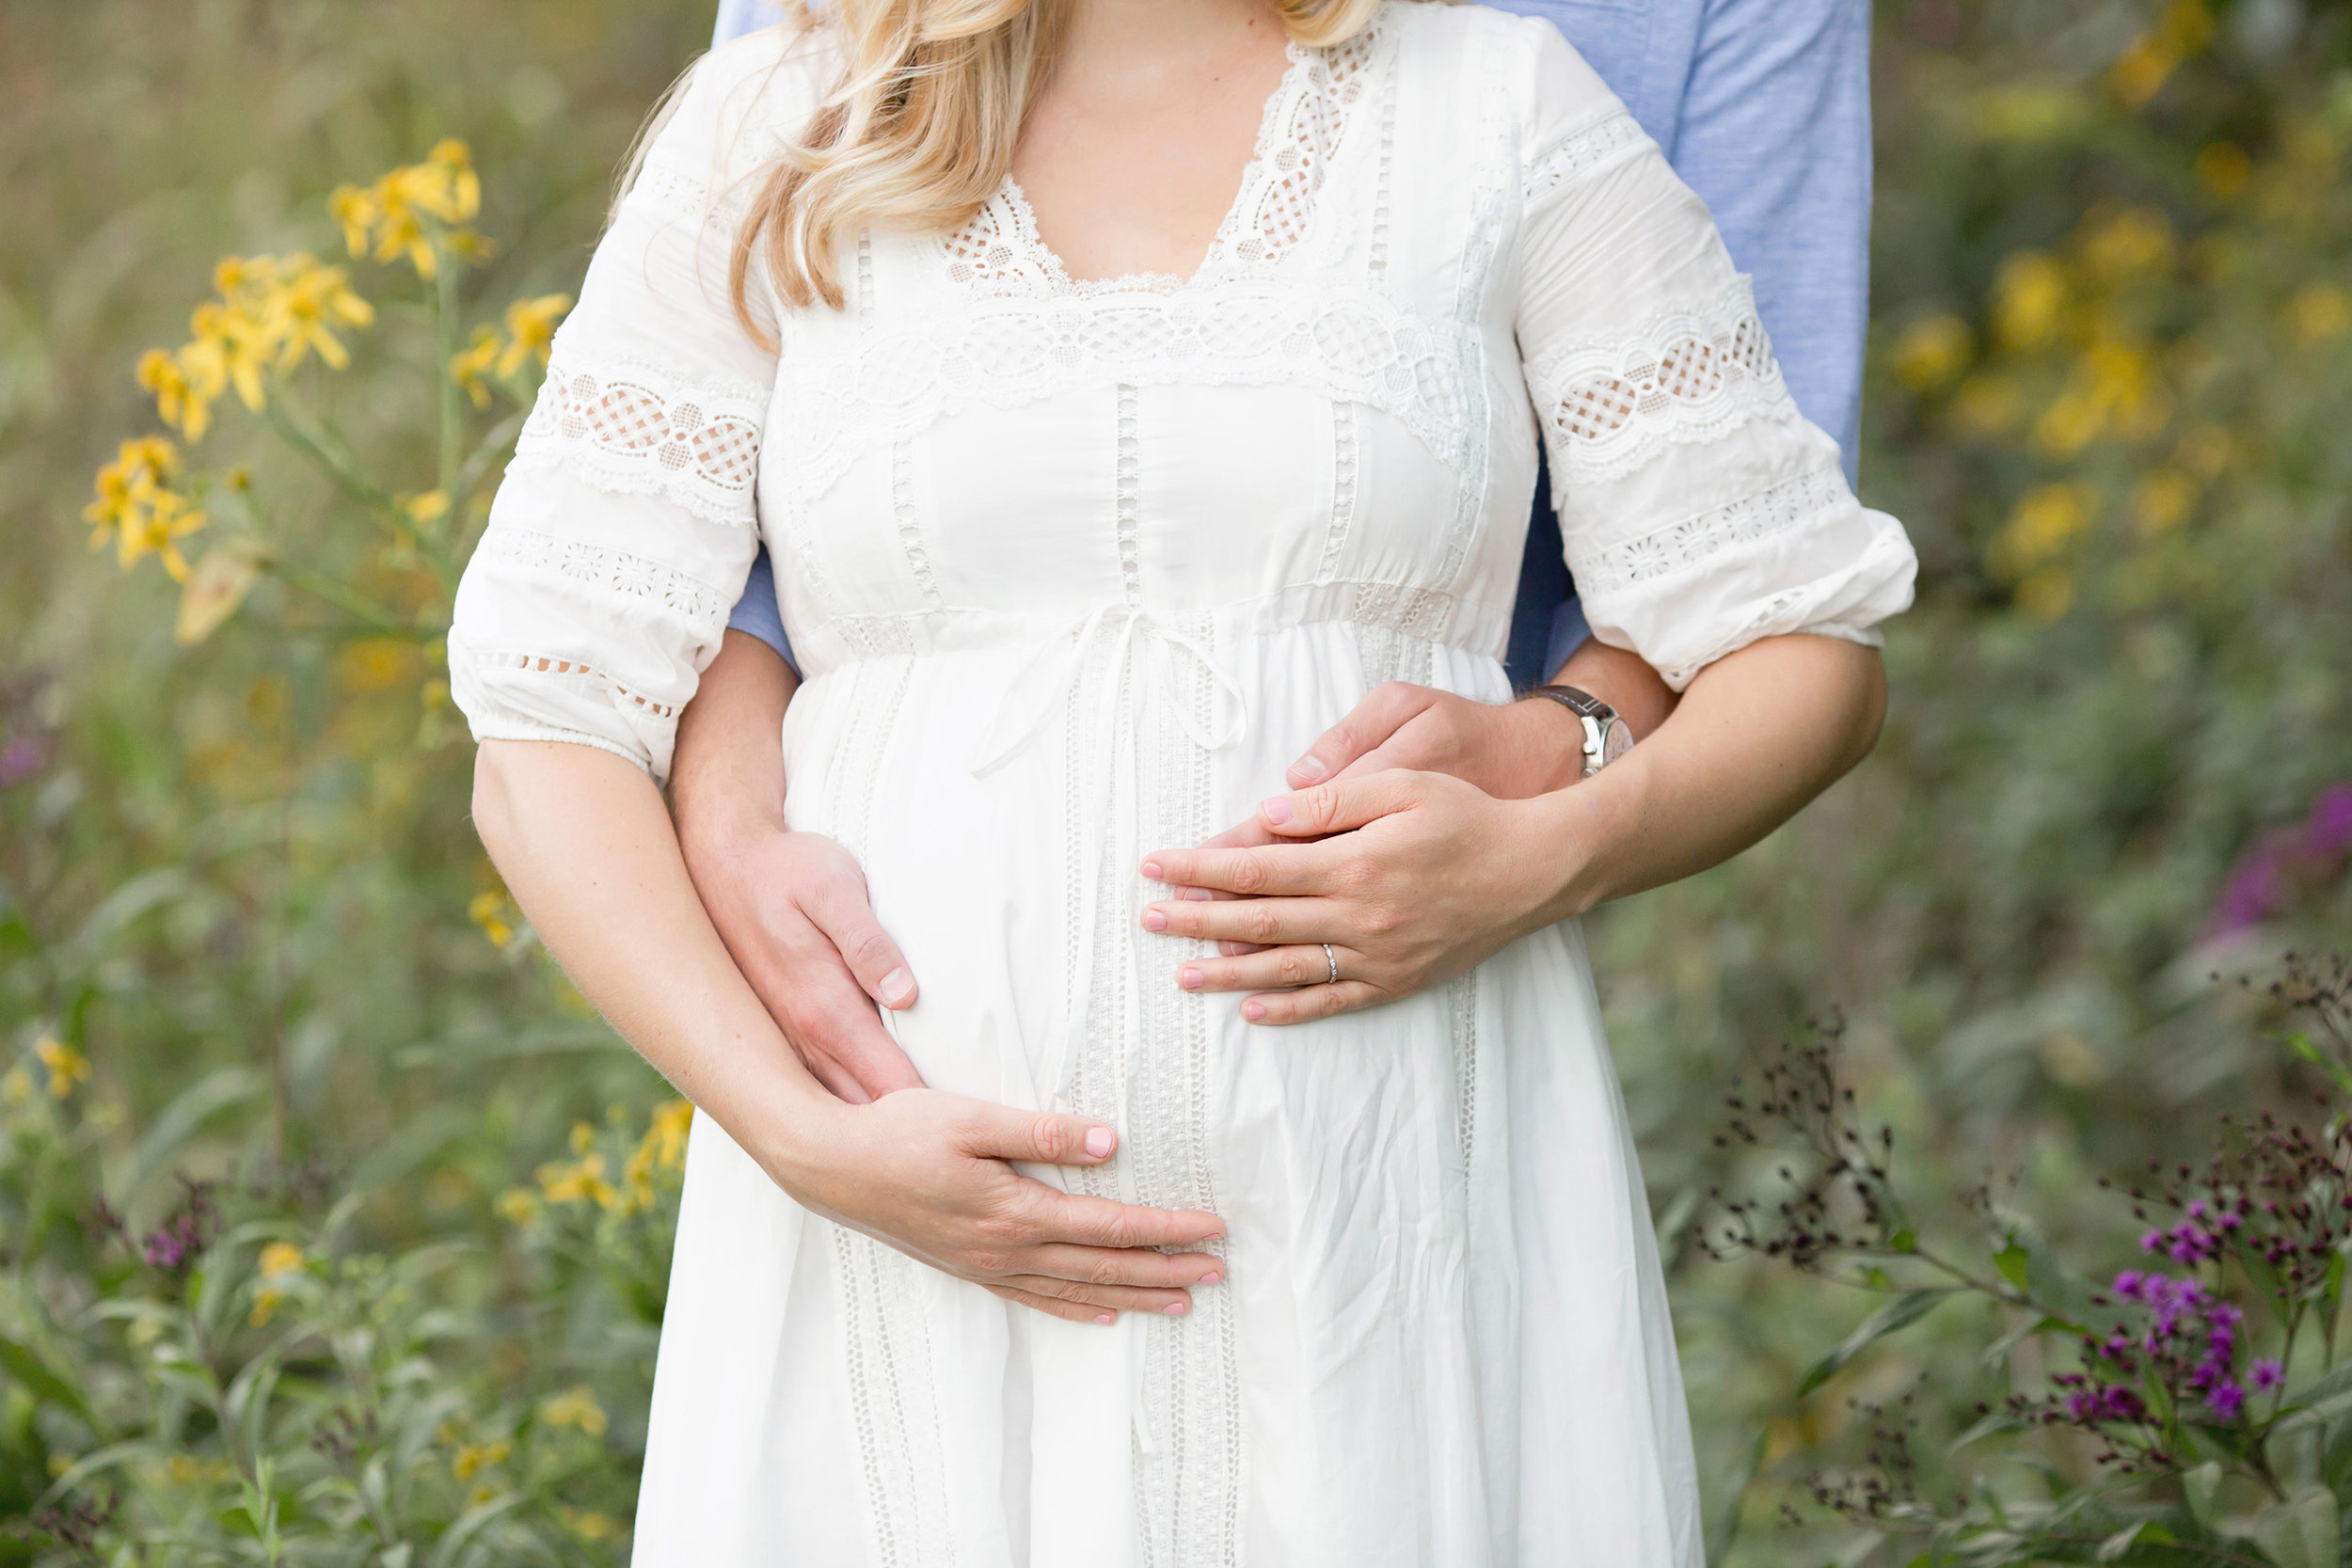 Louisville KY Maternity Photography | Family Photographer | Boho Matenrity Dress | newborn photography in louisville ky | outdoor photo session | Julie Brock Photography.jpg